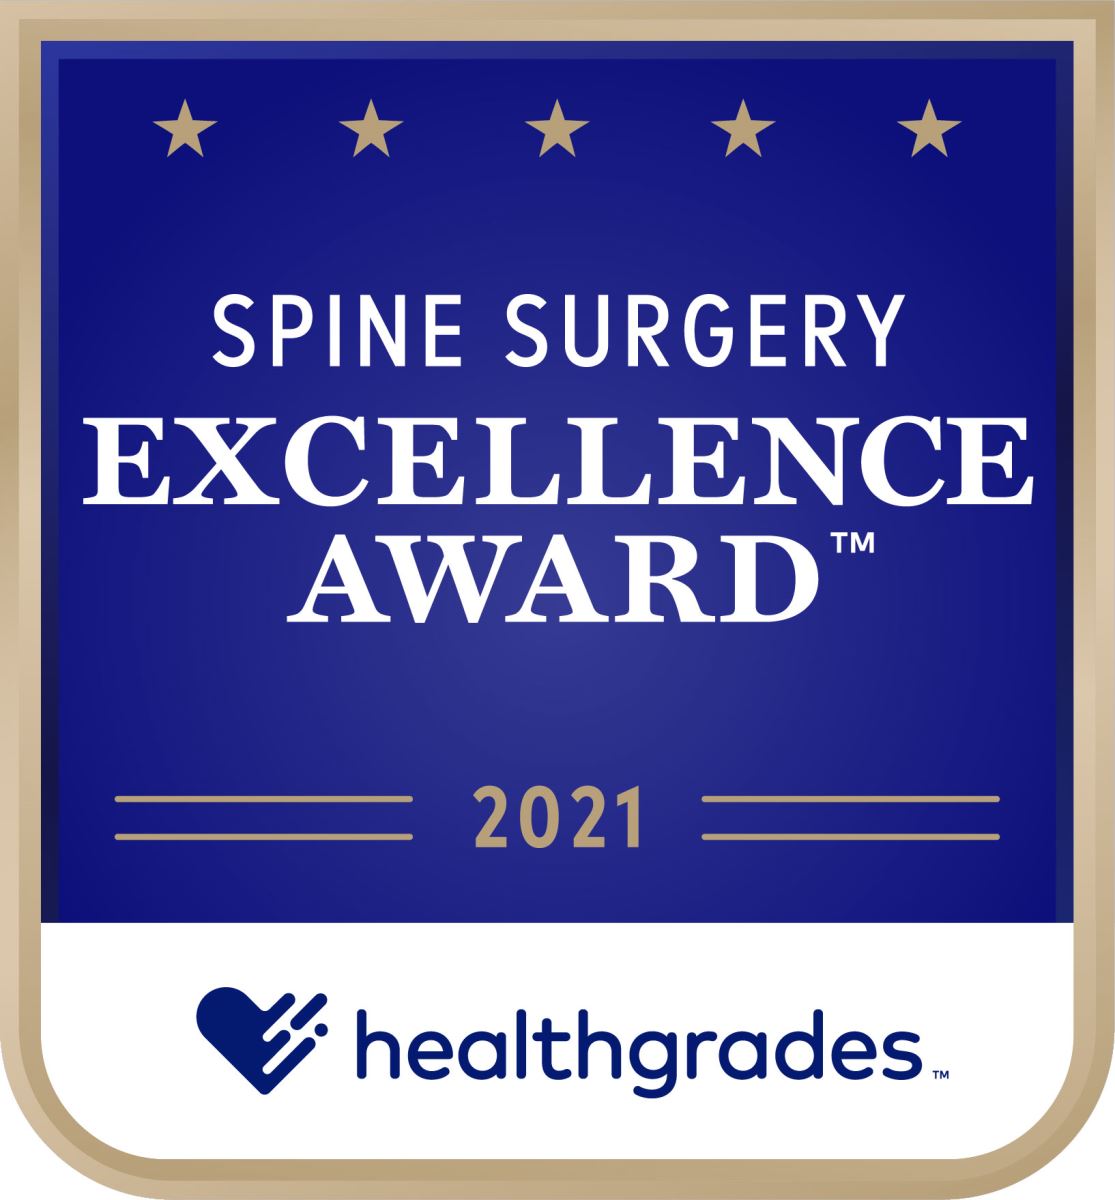 Spine Surgery Excellence Award 2021